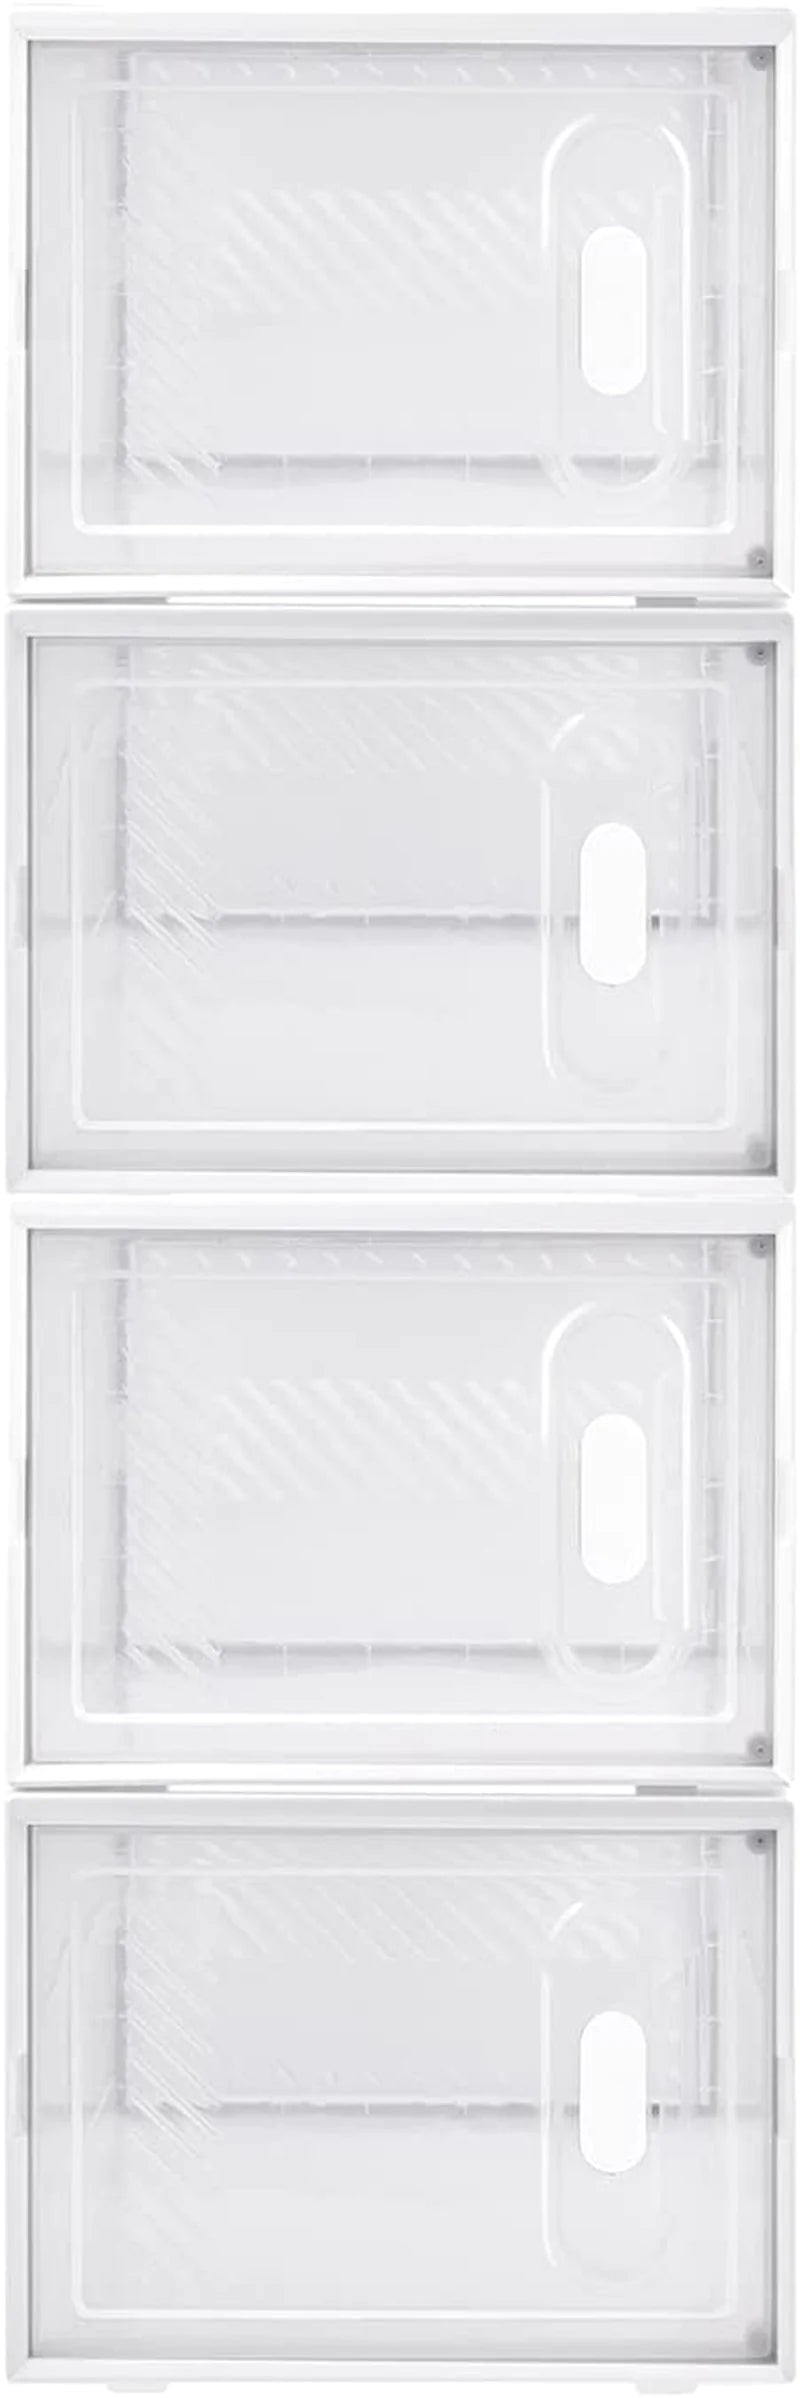 Zttopo XL Shoe Storage Box, 8 Packs Clear Plastic Stackable Shoe Organizer Bins Containers, X-Large up to US Size 12, Front Drop Shoe Boxes Holder with Lids Sneaker Storage Case for Sneakerheads Furniture > Cabinets & Storage > Armoires & Wardrobes Zttopo 4 Packs  